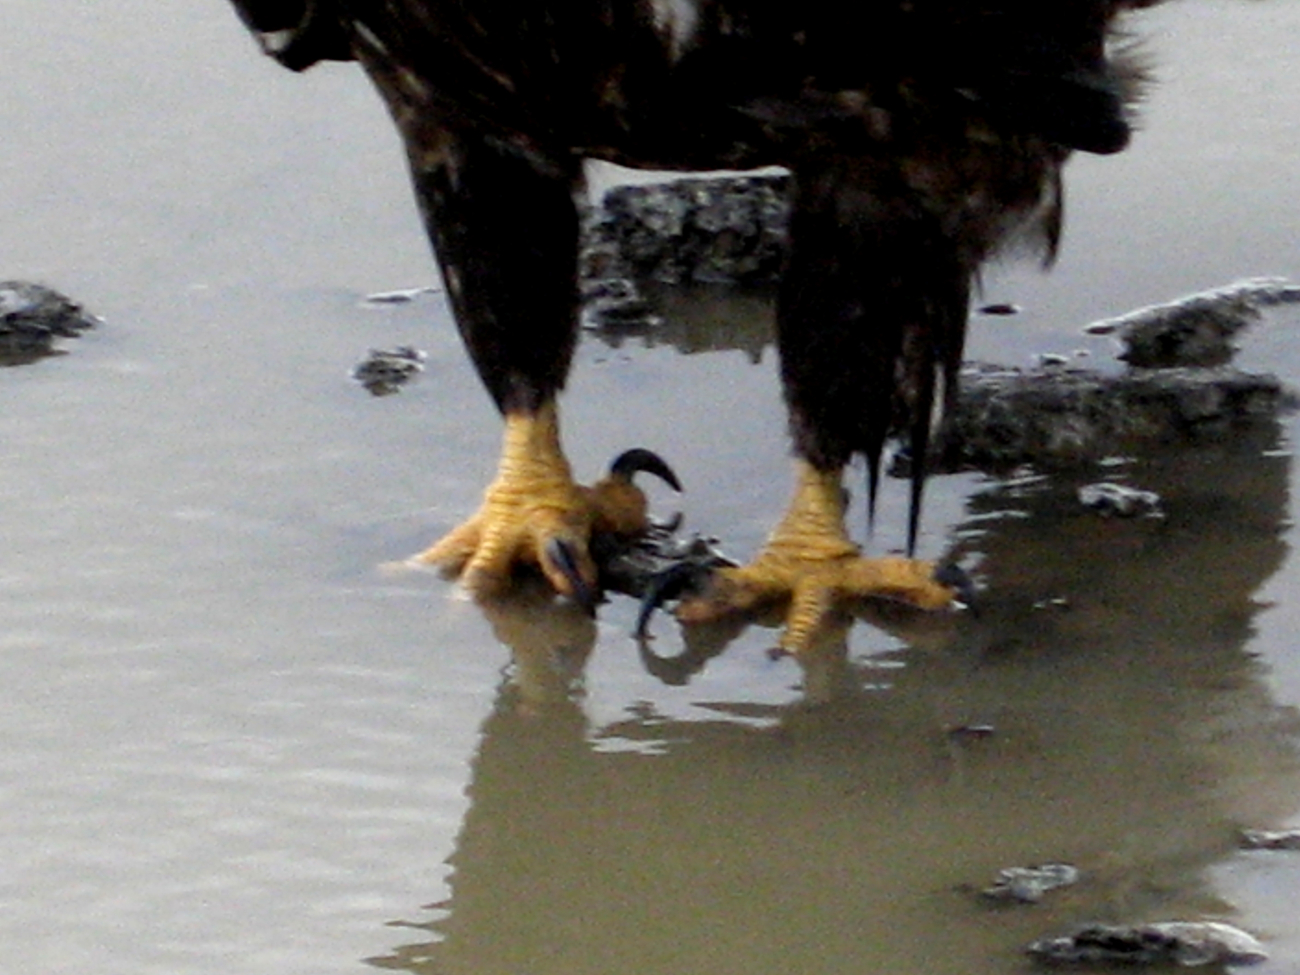 Large strong talons of eagle